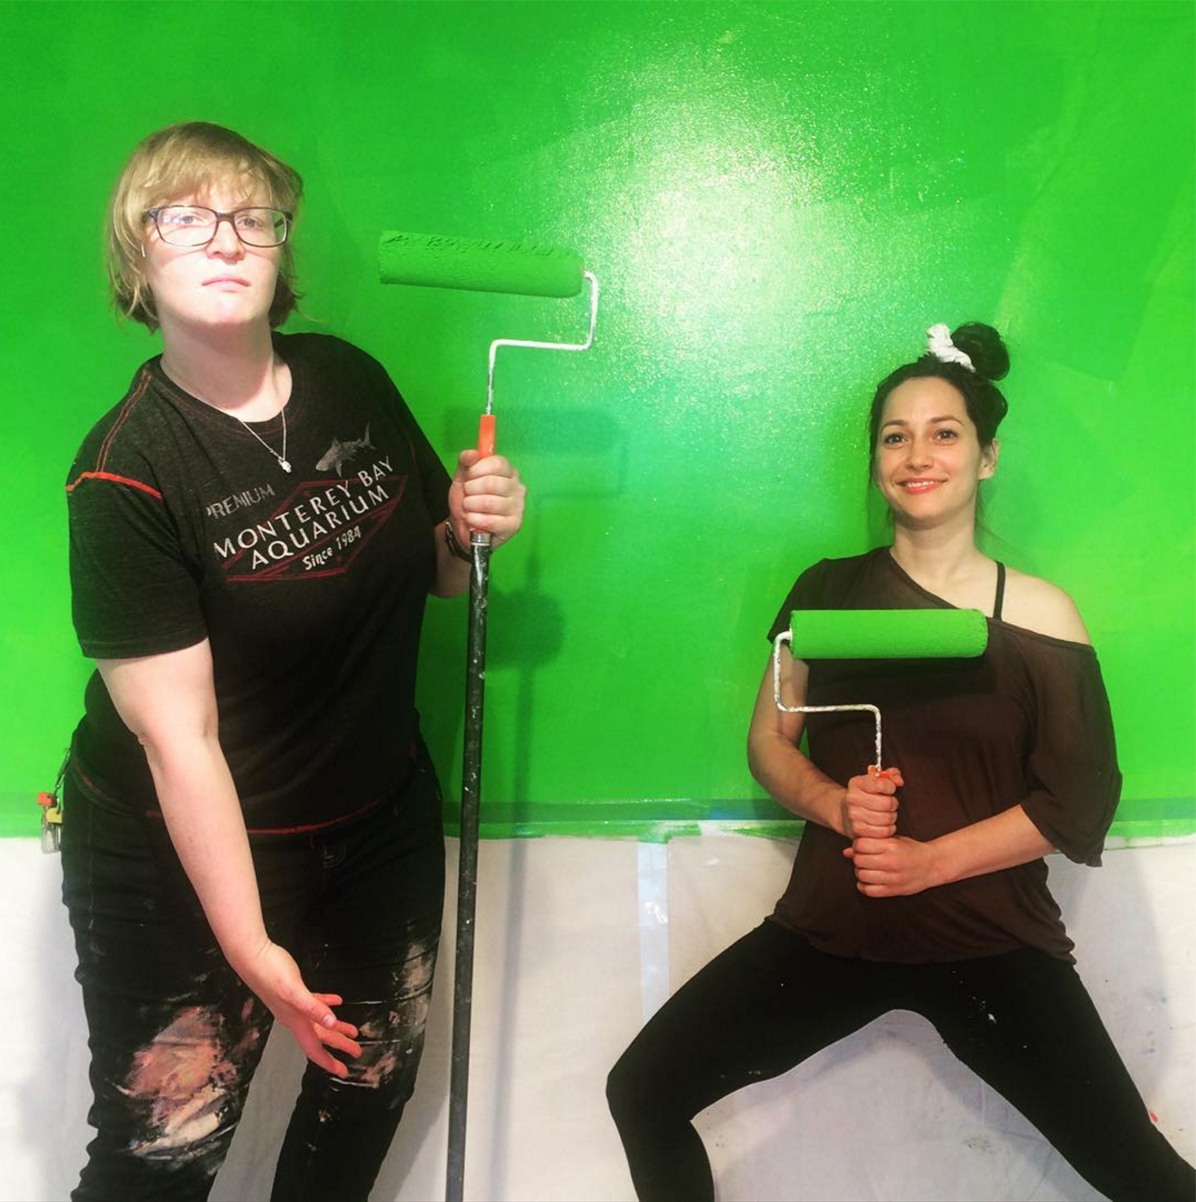 Artists Kate Rhoades and Carolyn Janssen turning a wall into a green screen at the new Royal Production Company.